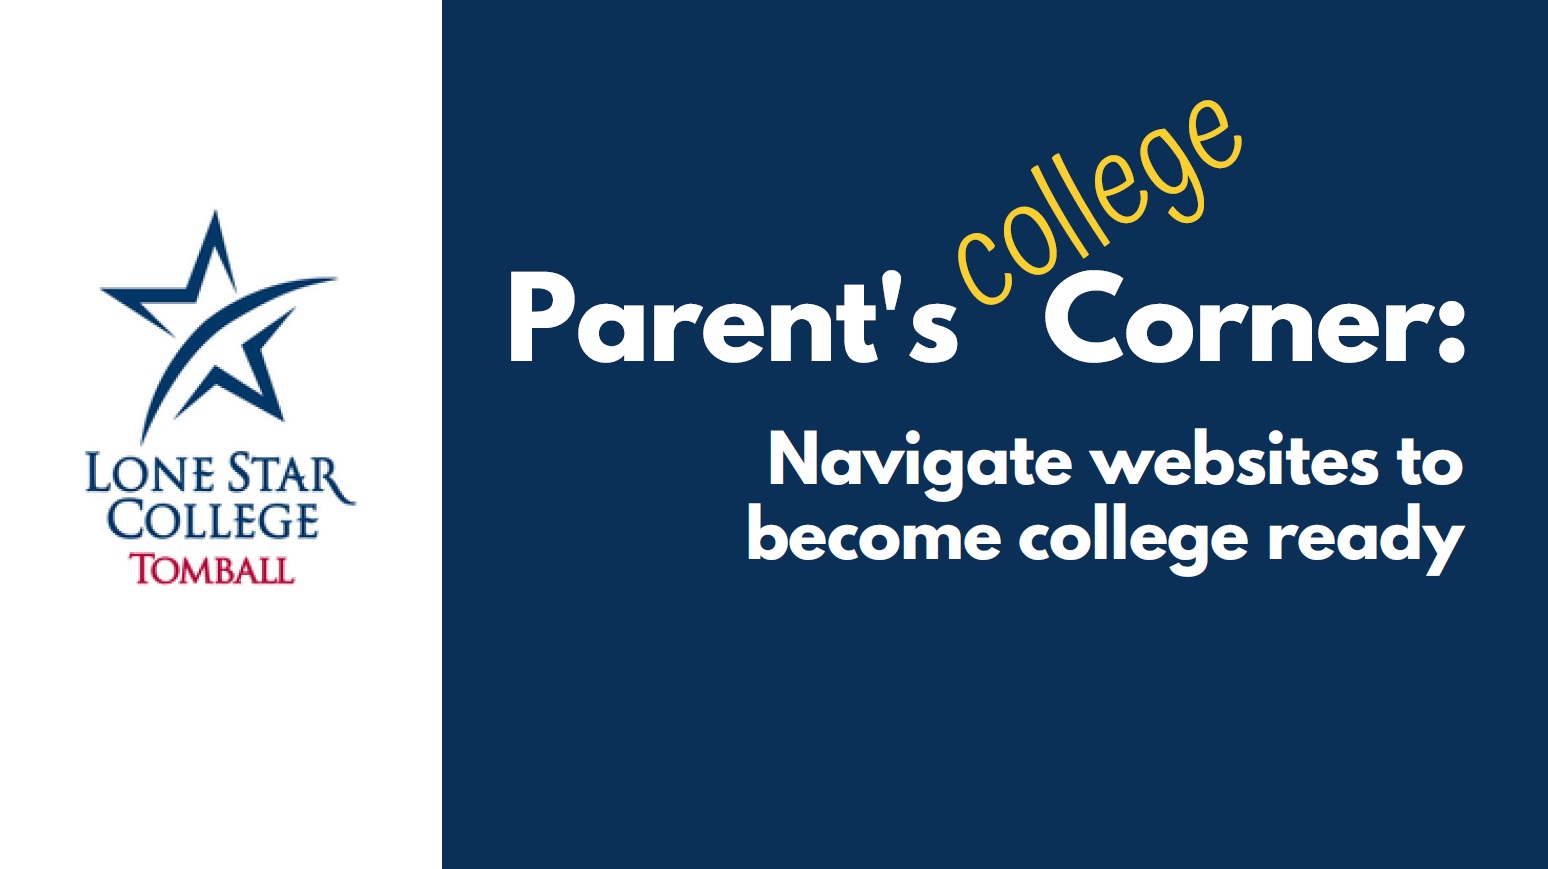 Parent's College Corner: Navigate websites to become college ready